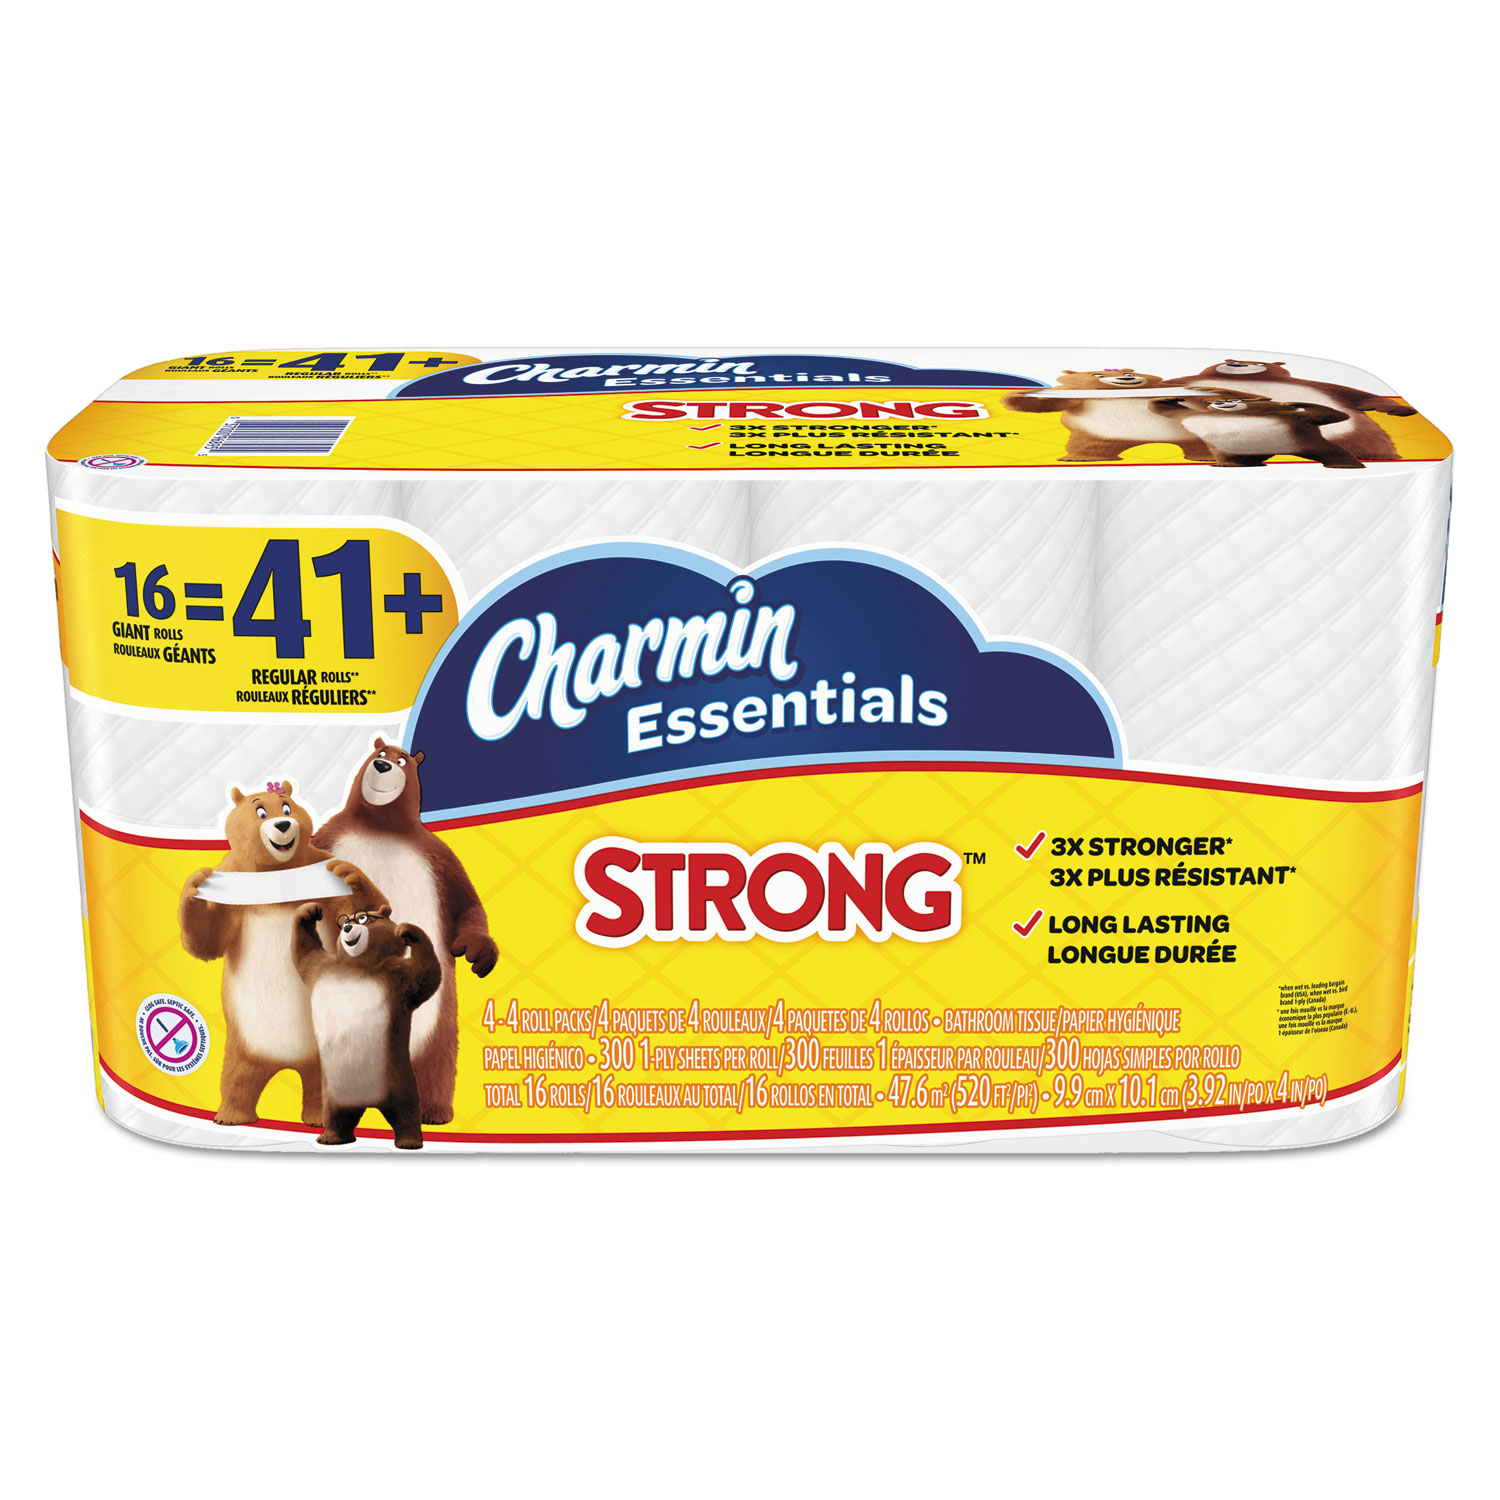  Charmin 96895 Essentials Strong Bathroom Tissue, Septic Safe, 1-Ply, White, 4 x 3.92, 300/Roll, 16 Roll/Pack (PGC96895) 